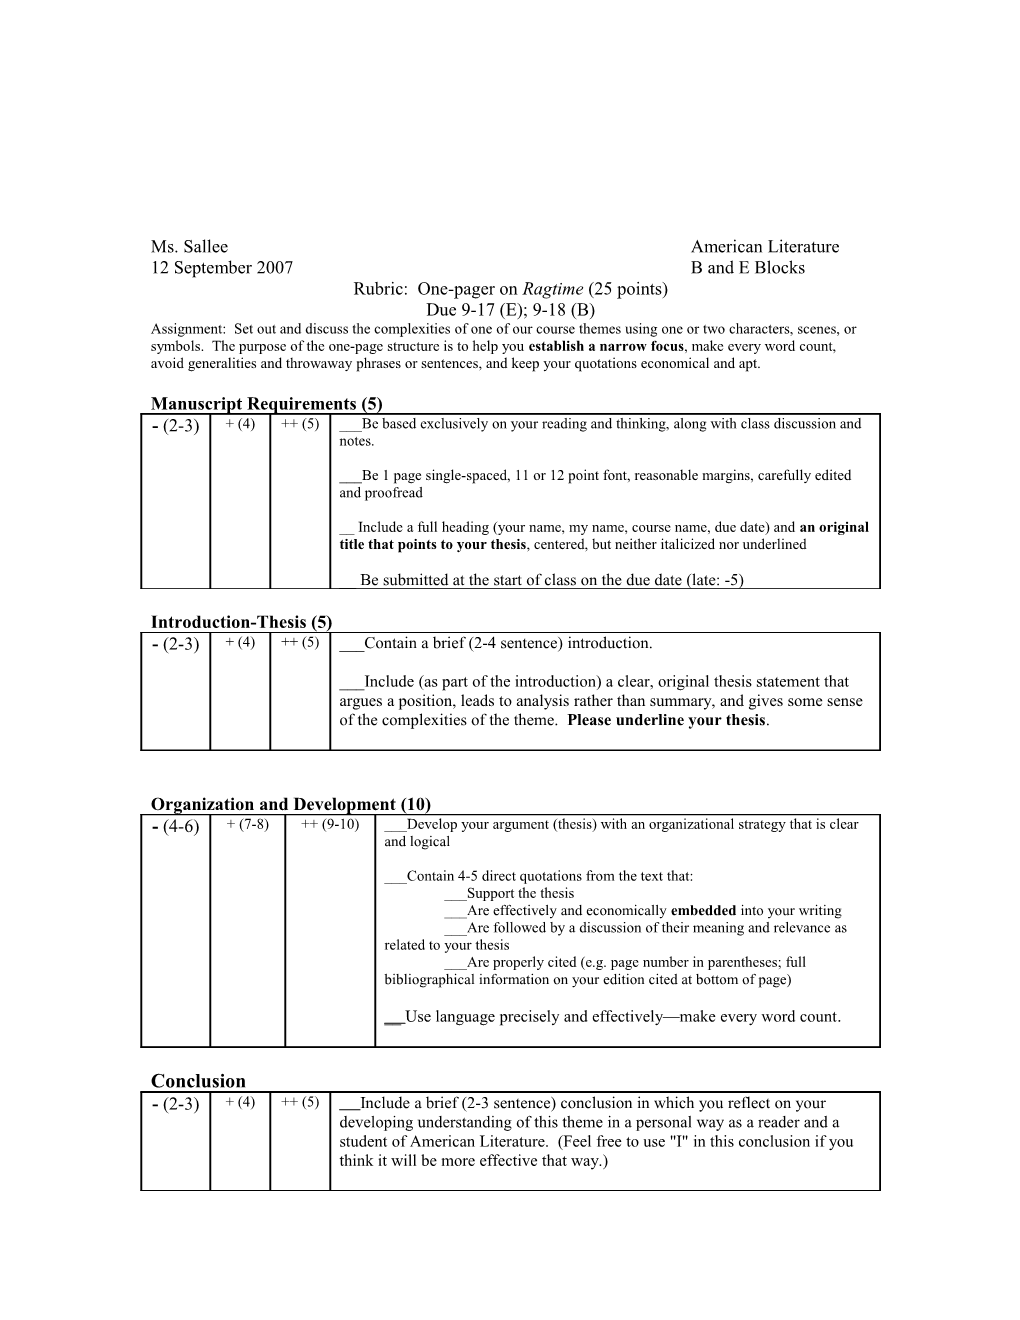 Rubric: One-Pager on Ragtime (25 Points)